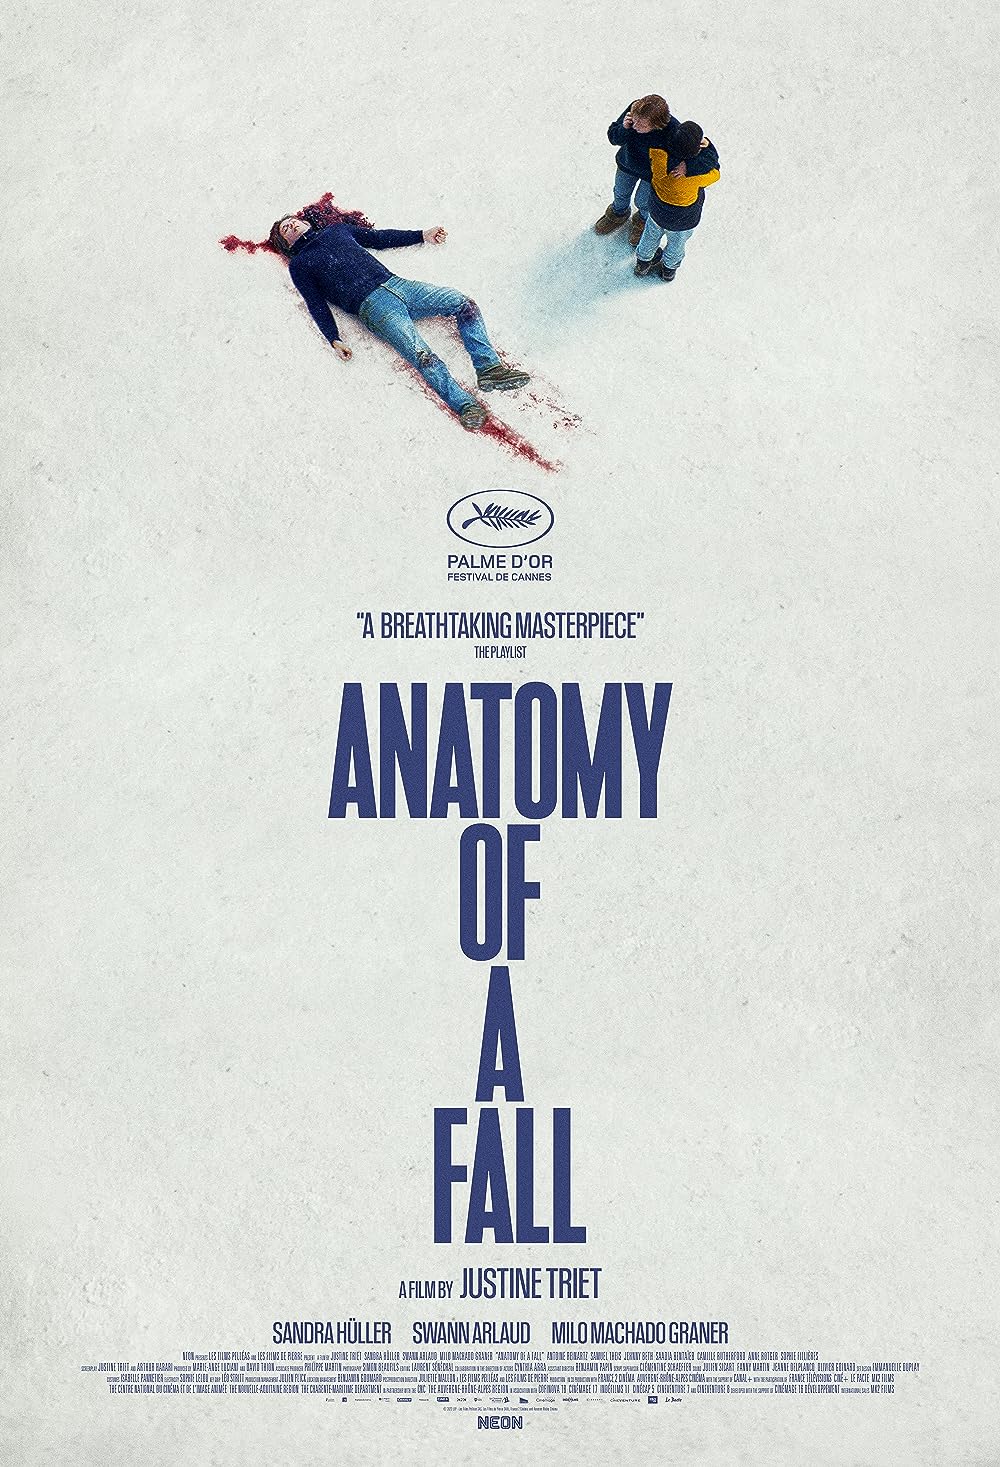 Poster for Anatomy of a Fall with the title of the movie, a dead body above the title, and two other figures standing near the body.